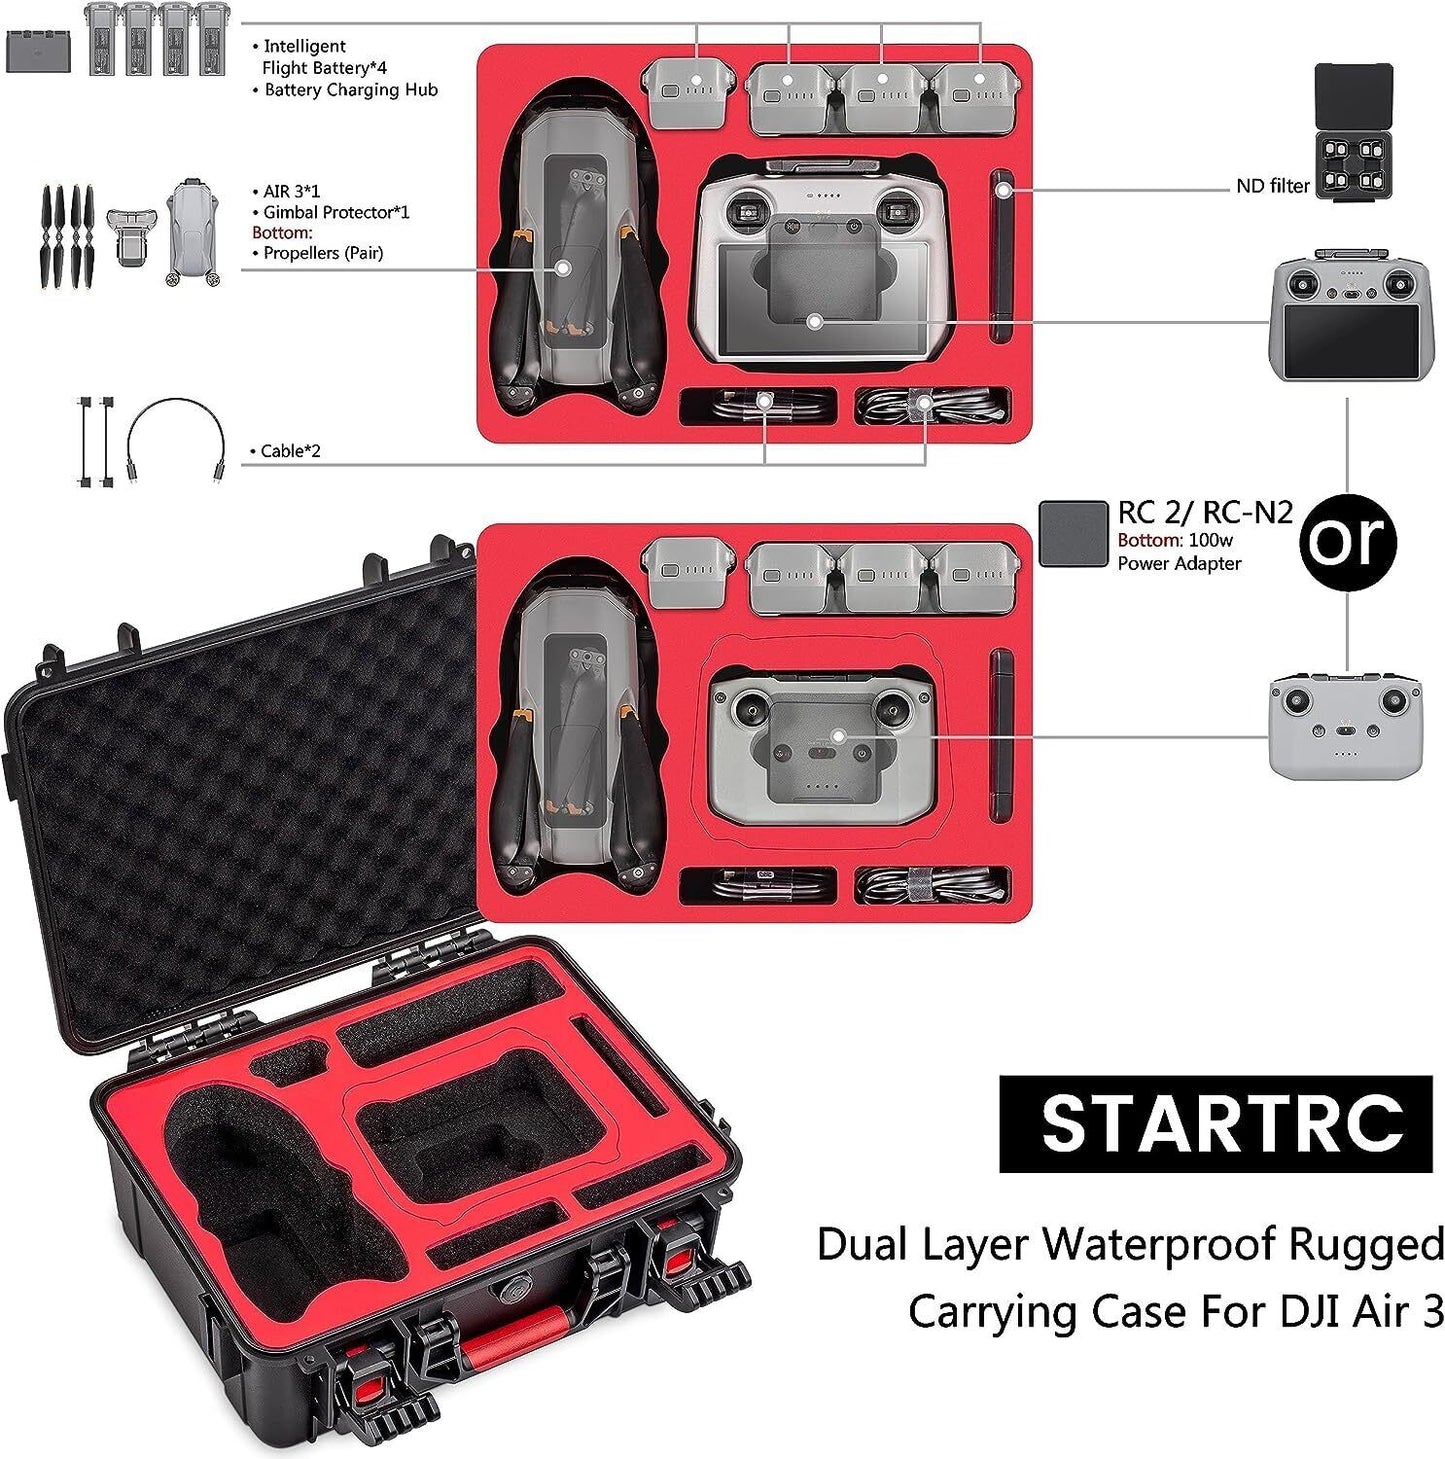 STARTRC Air 3 Hard Case Waterproof Carrying Case for DJI Air 3 Fly More Combo